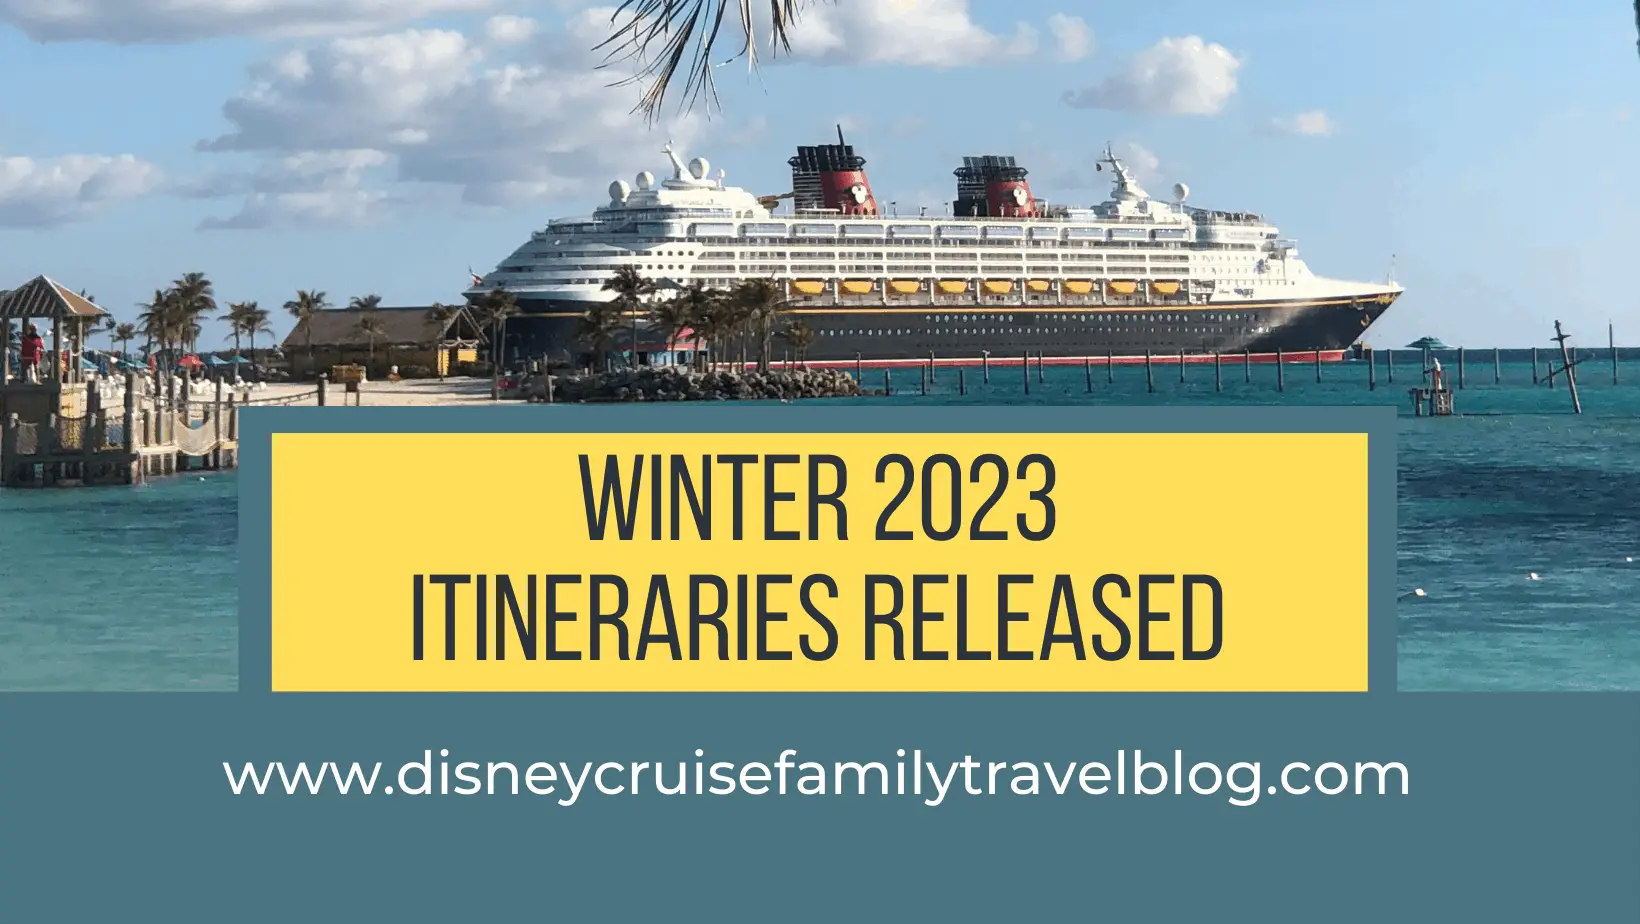 Winter 2023 Disney Cruise Itineraries released The Disney Cruise